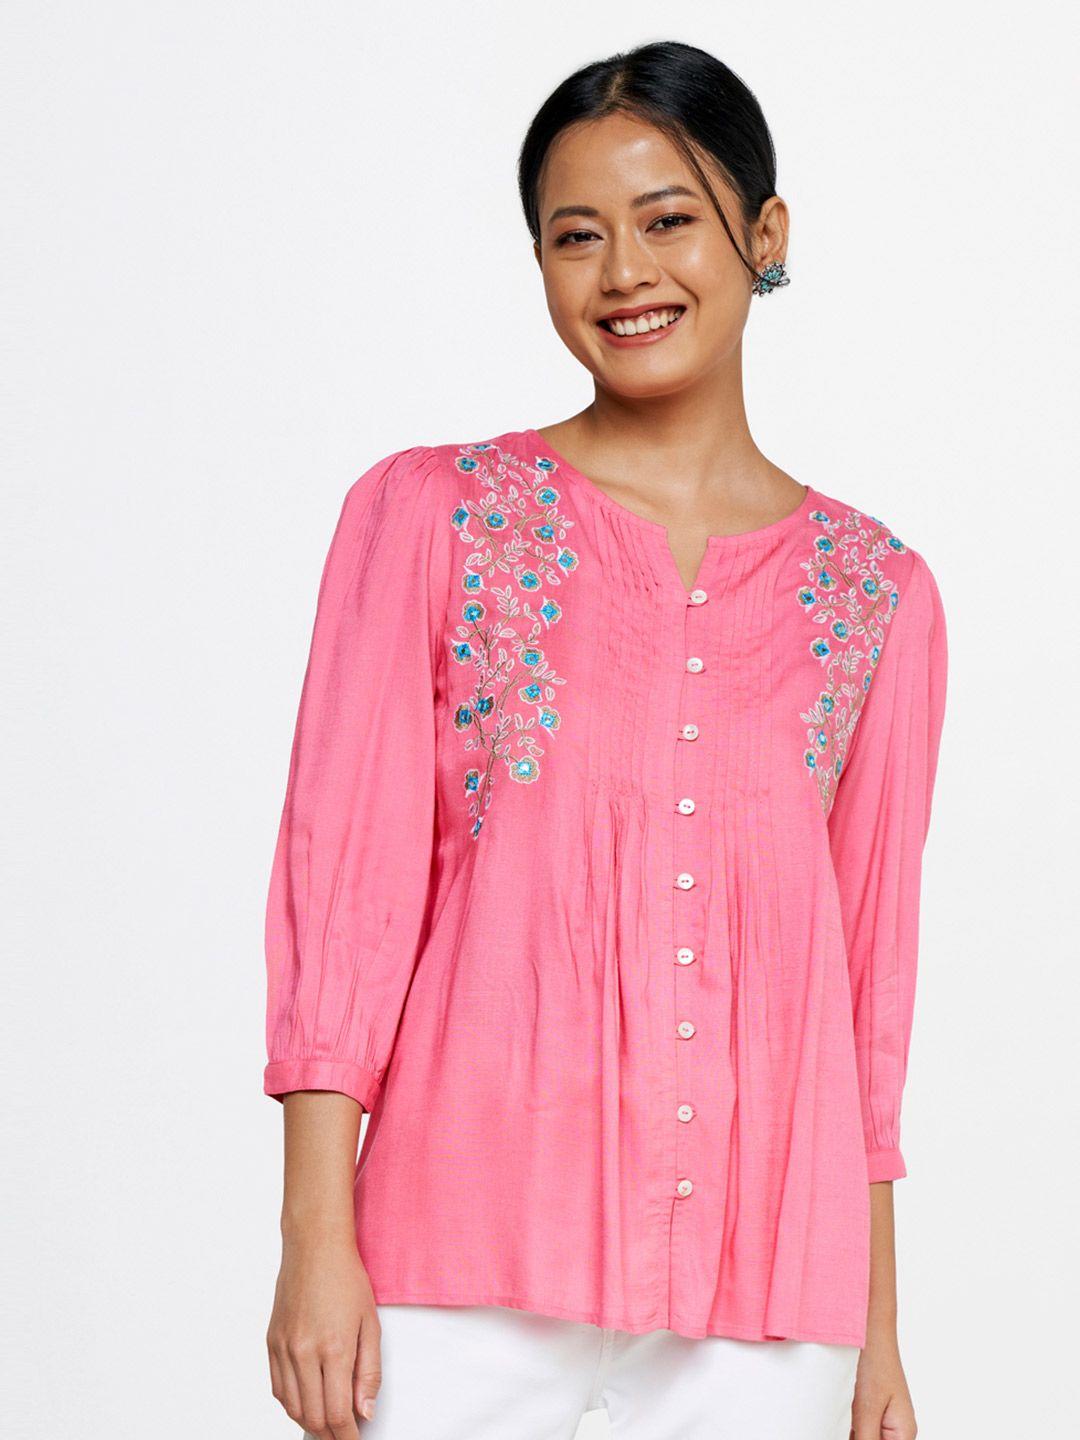 global desi floral embroidered round neck top